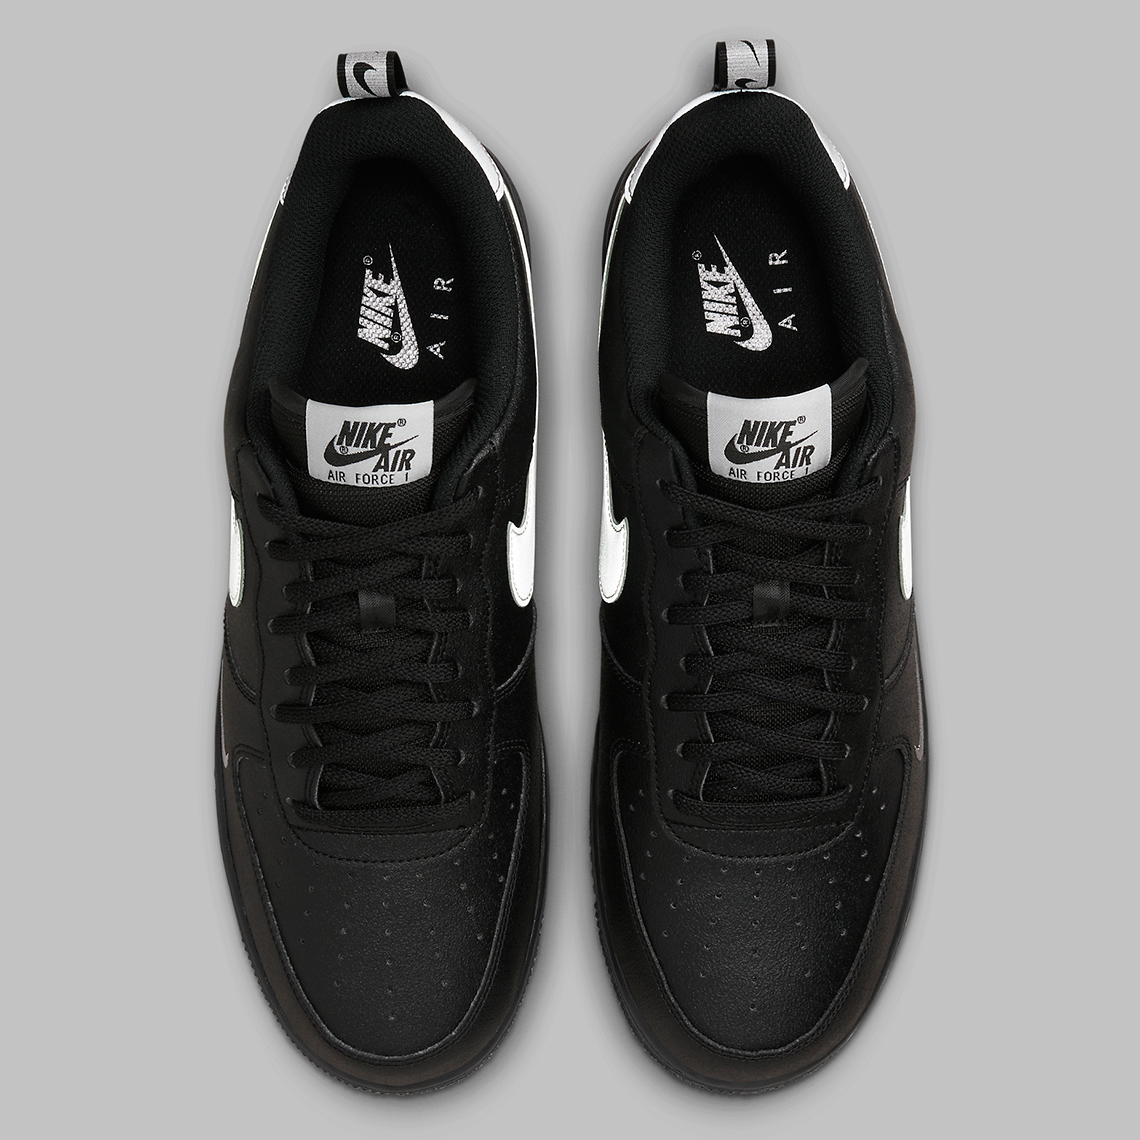 nike air force 1 low black white dx8967 001 8